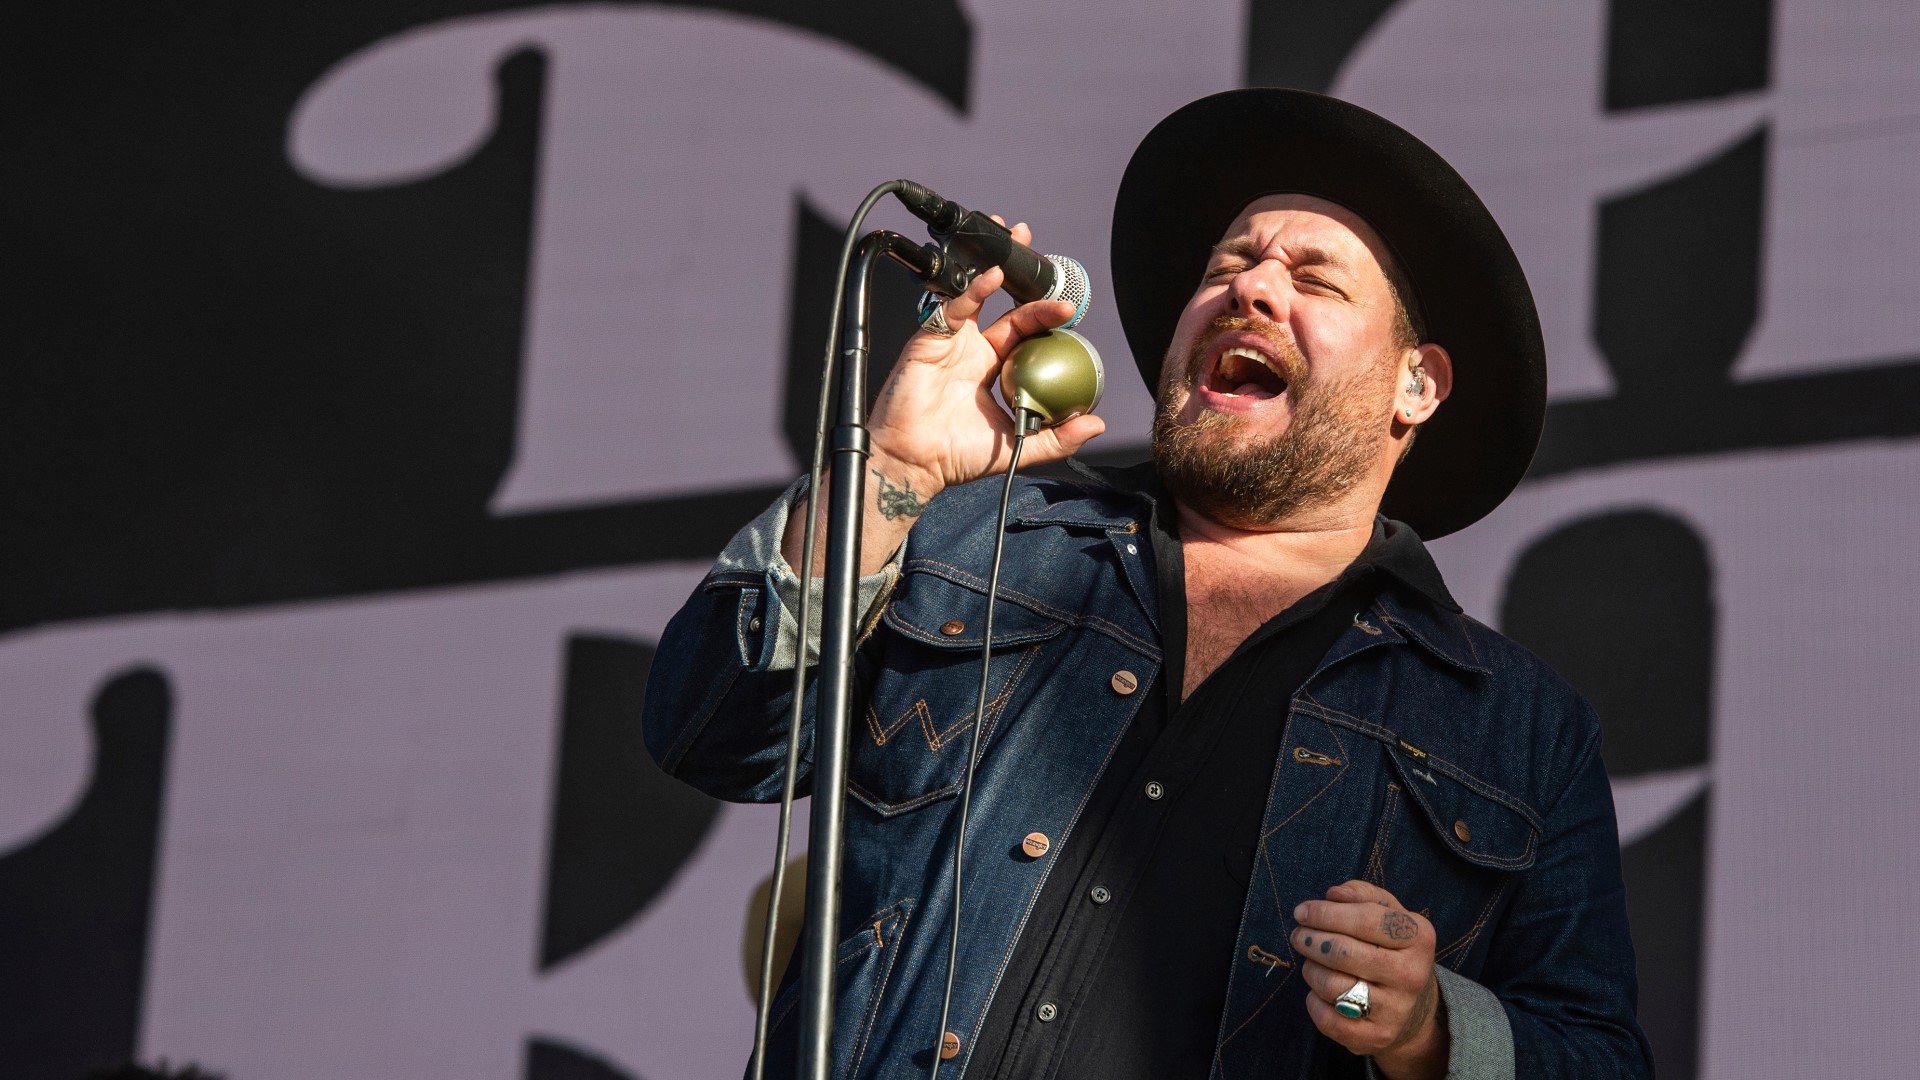 The Rolling Stones have announced that Nathaniel Rateliff & The Night Sweats will open for The Rolling Stones in Denver at Broncos Stadium at Mile High on Saturday, Aug. 10.